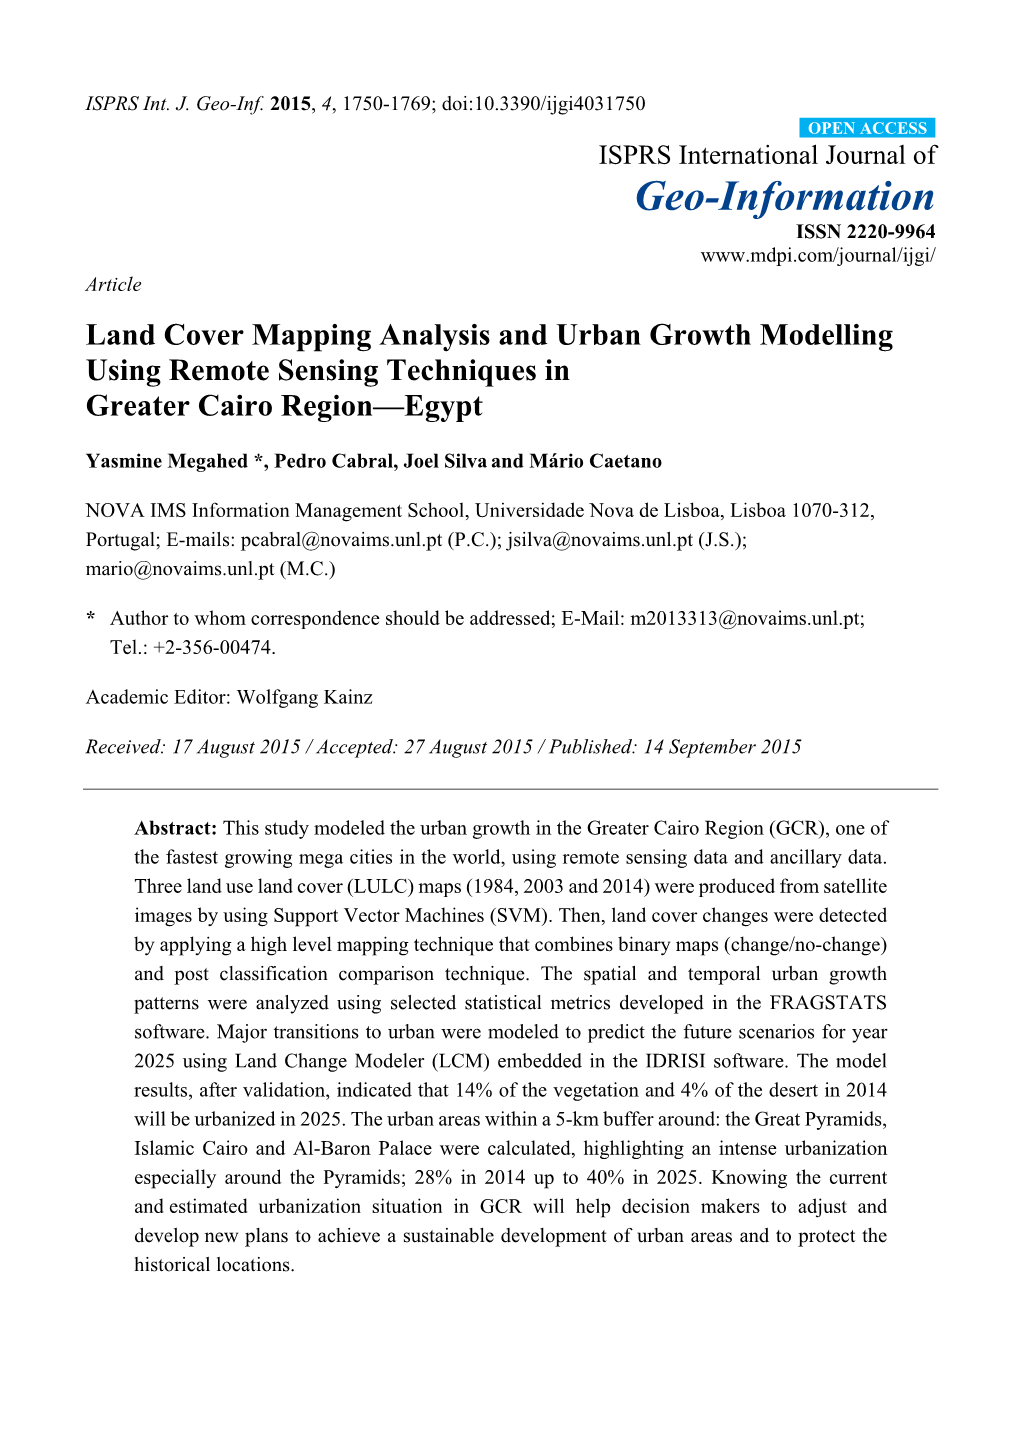 Land Cover Mapping Analysis and Urban Growth Modelling Using Remote Sensing Techniques in Greater Cairo Region—Egypt